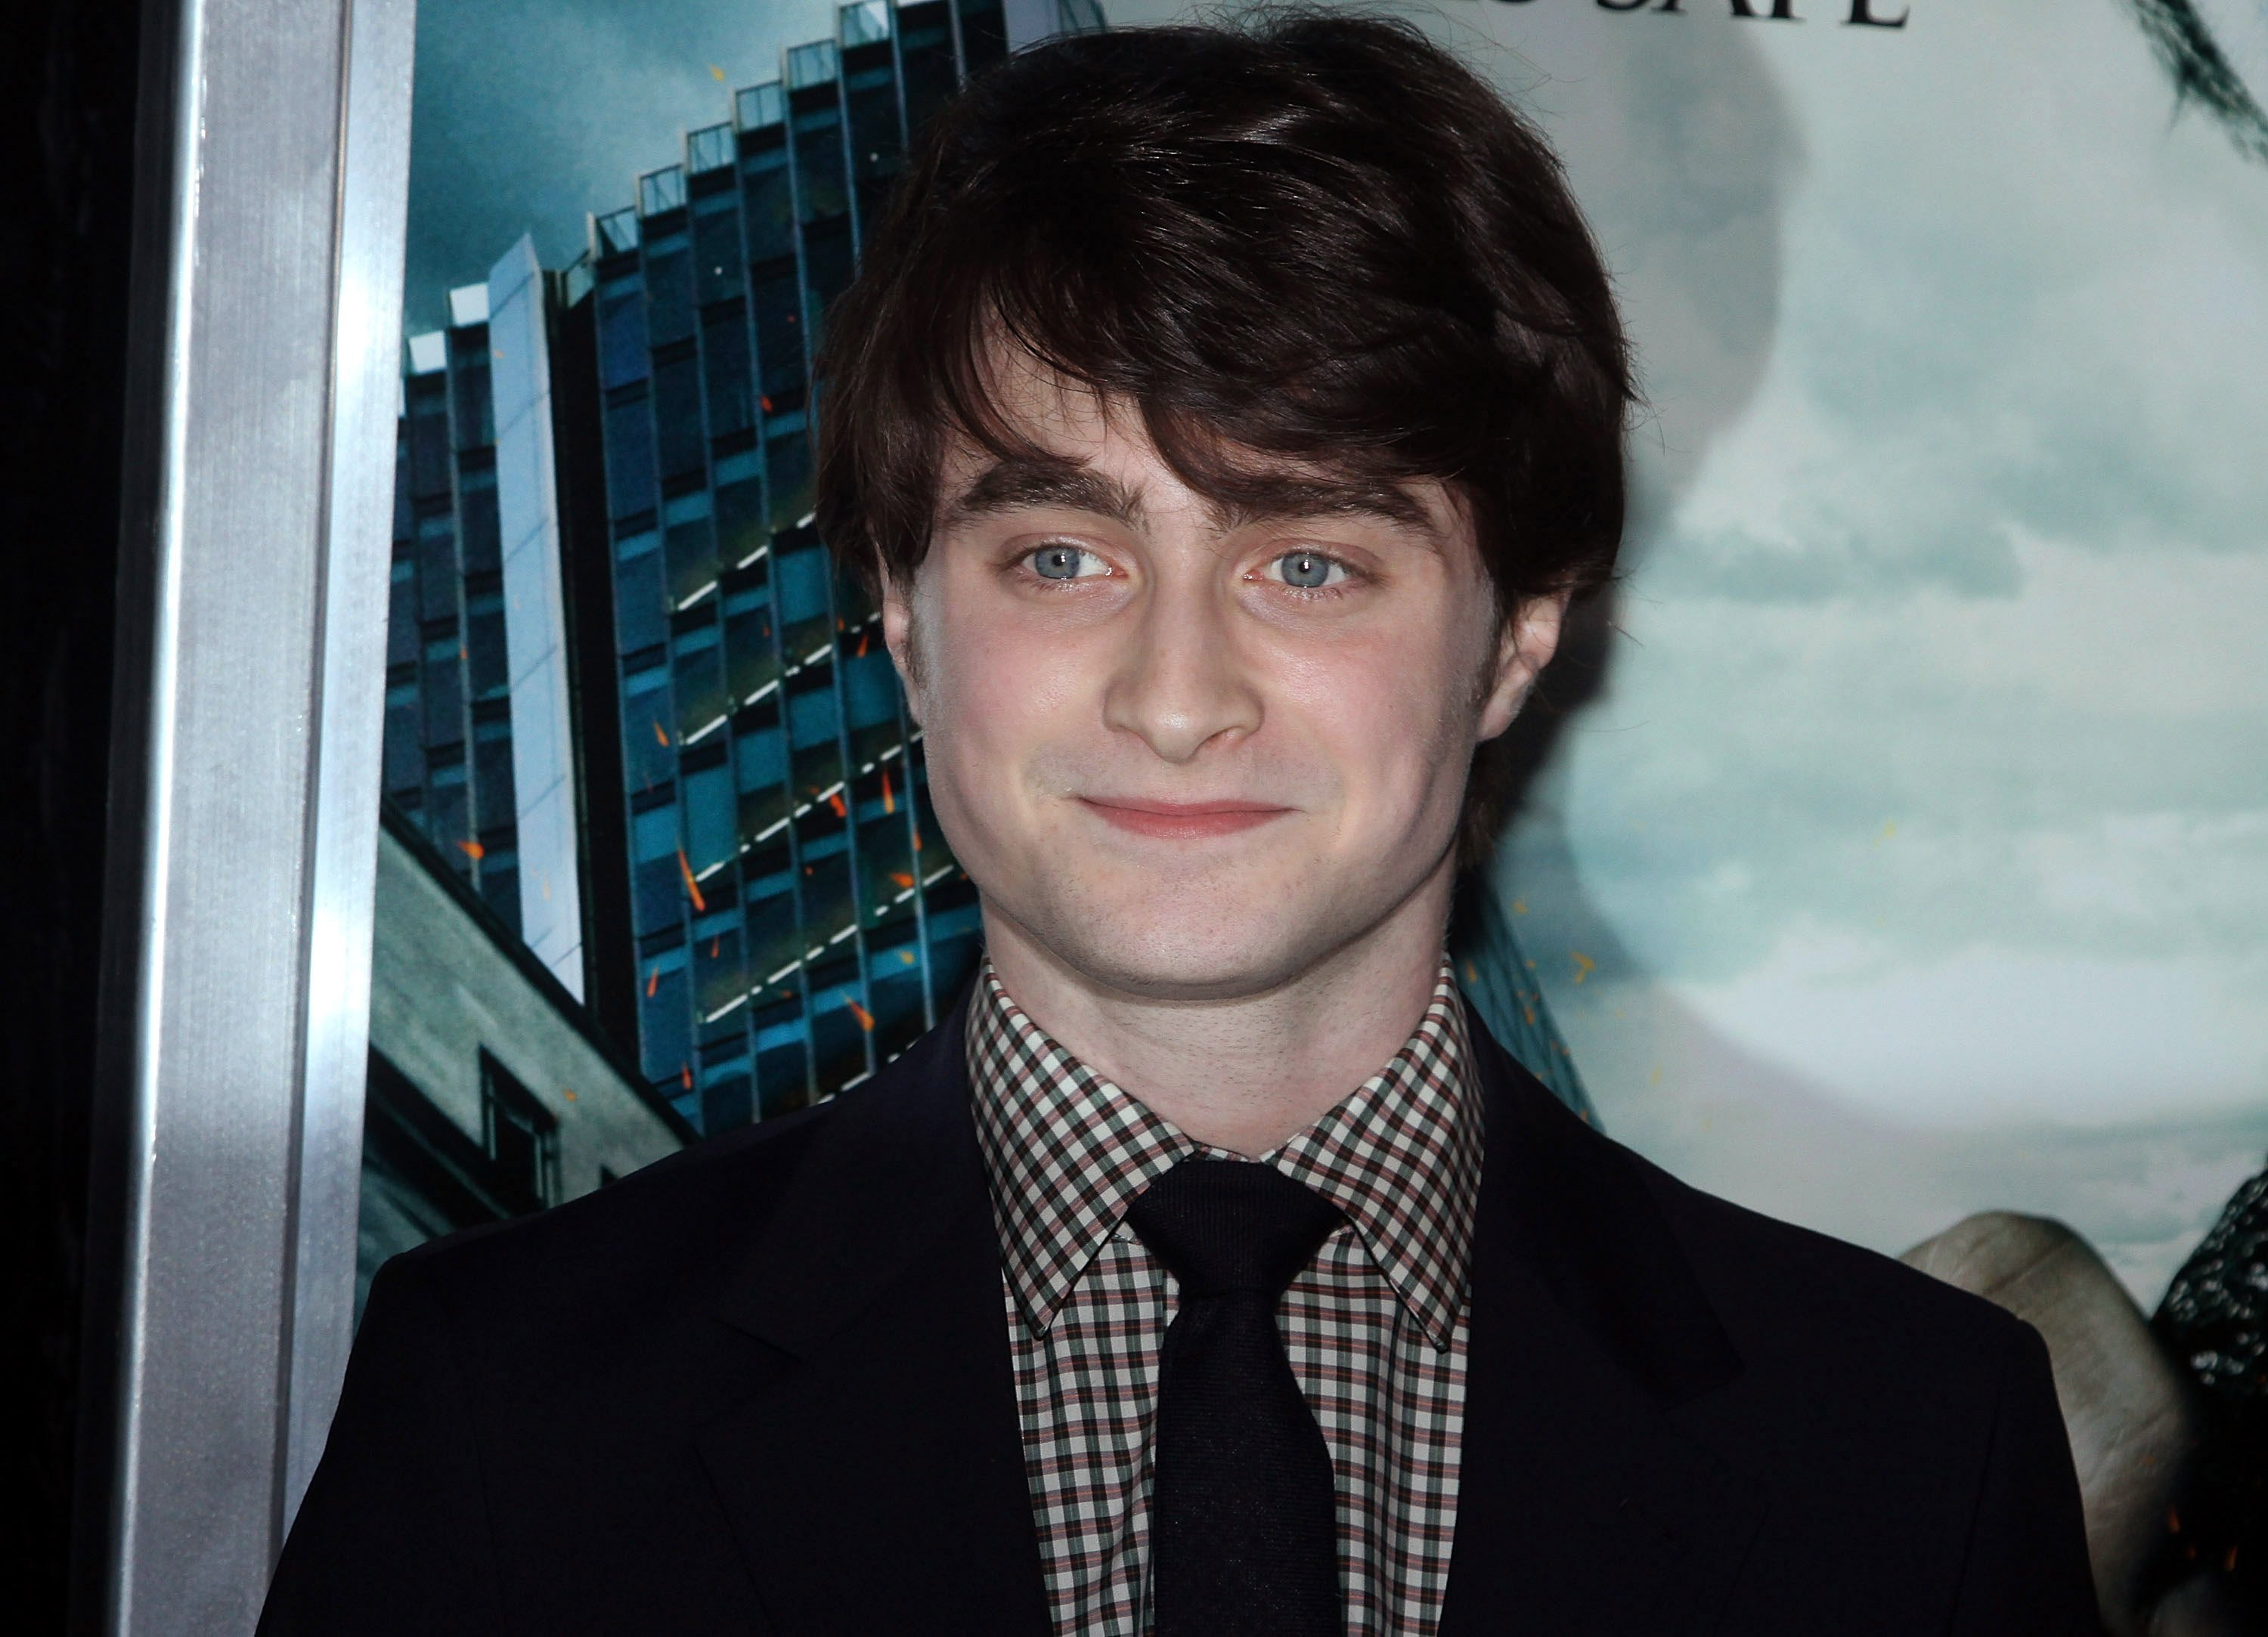 Daniel Radcliffe poses at the premiere of "Harry Potter and the Deathly Hallows - Part 1" at Alice Tully Hall on November 15, 2010 in New York City.